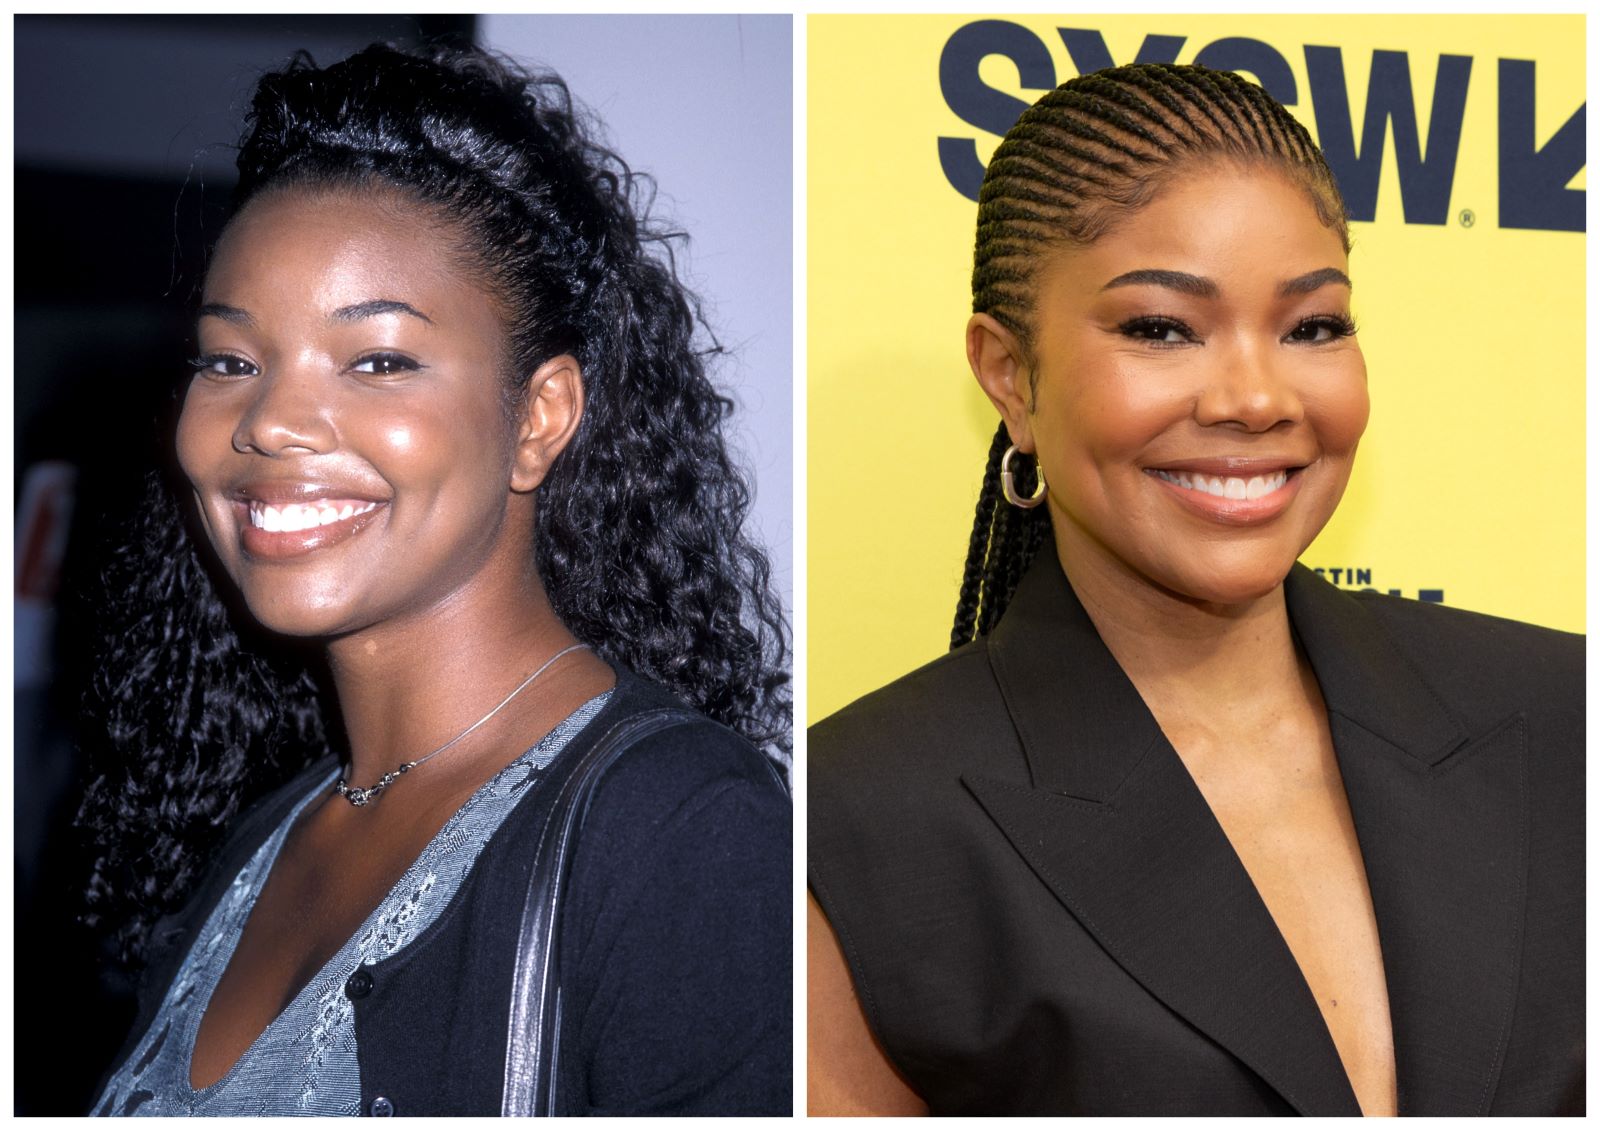 '10 Things I Hate About You' cast member Gabrielle Union